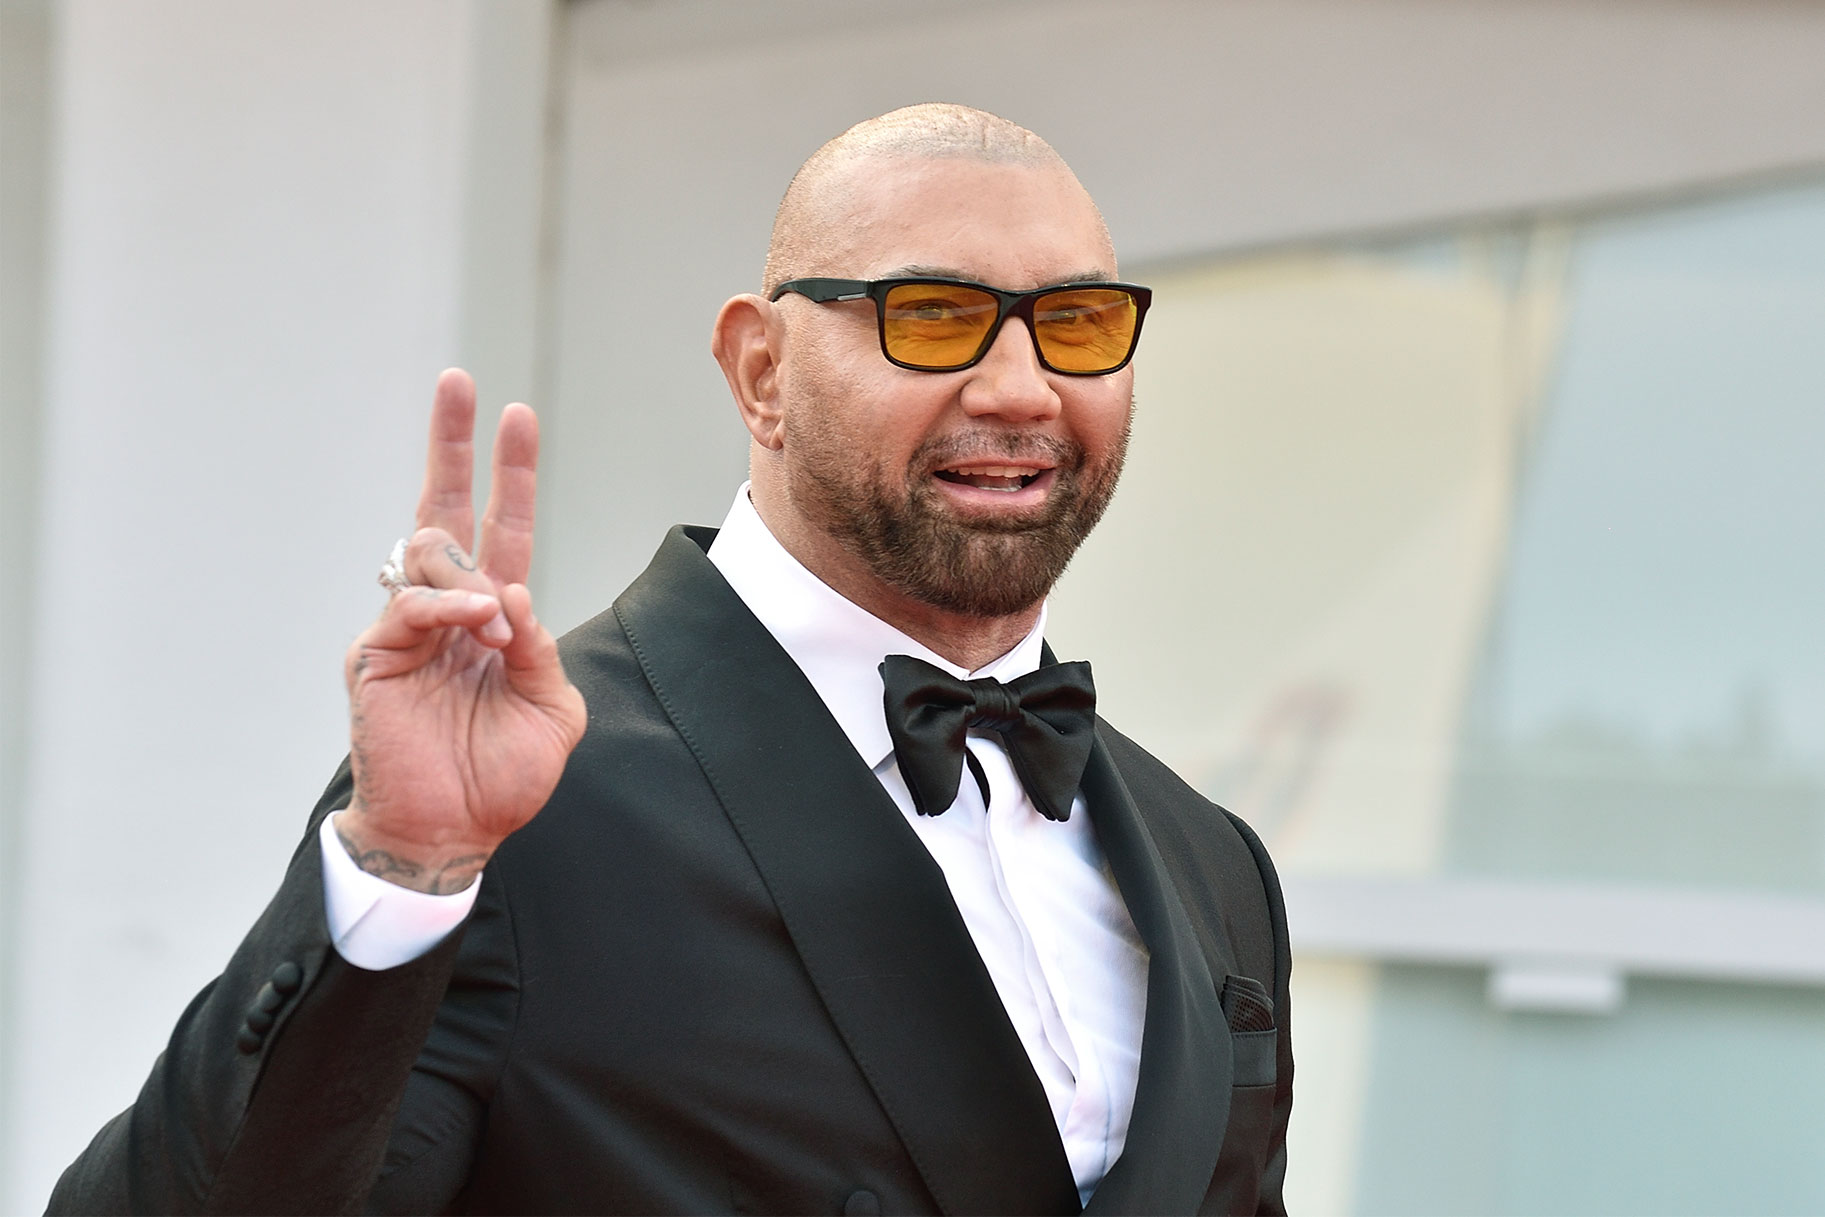 Every Upcoming Dave Bautista Movie & TV Show